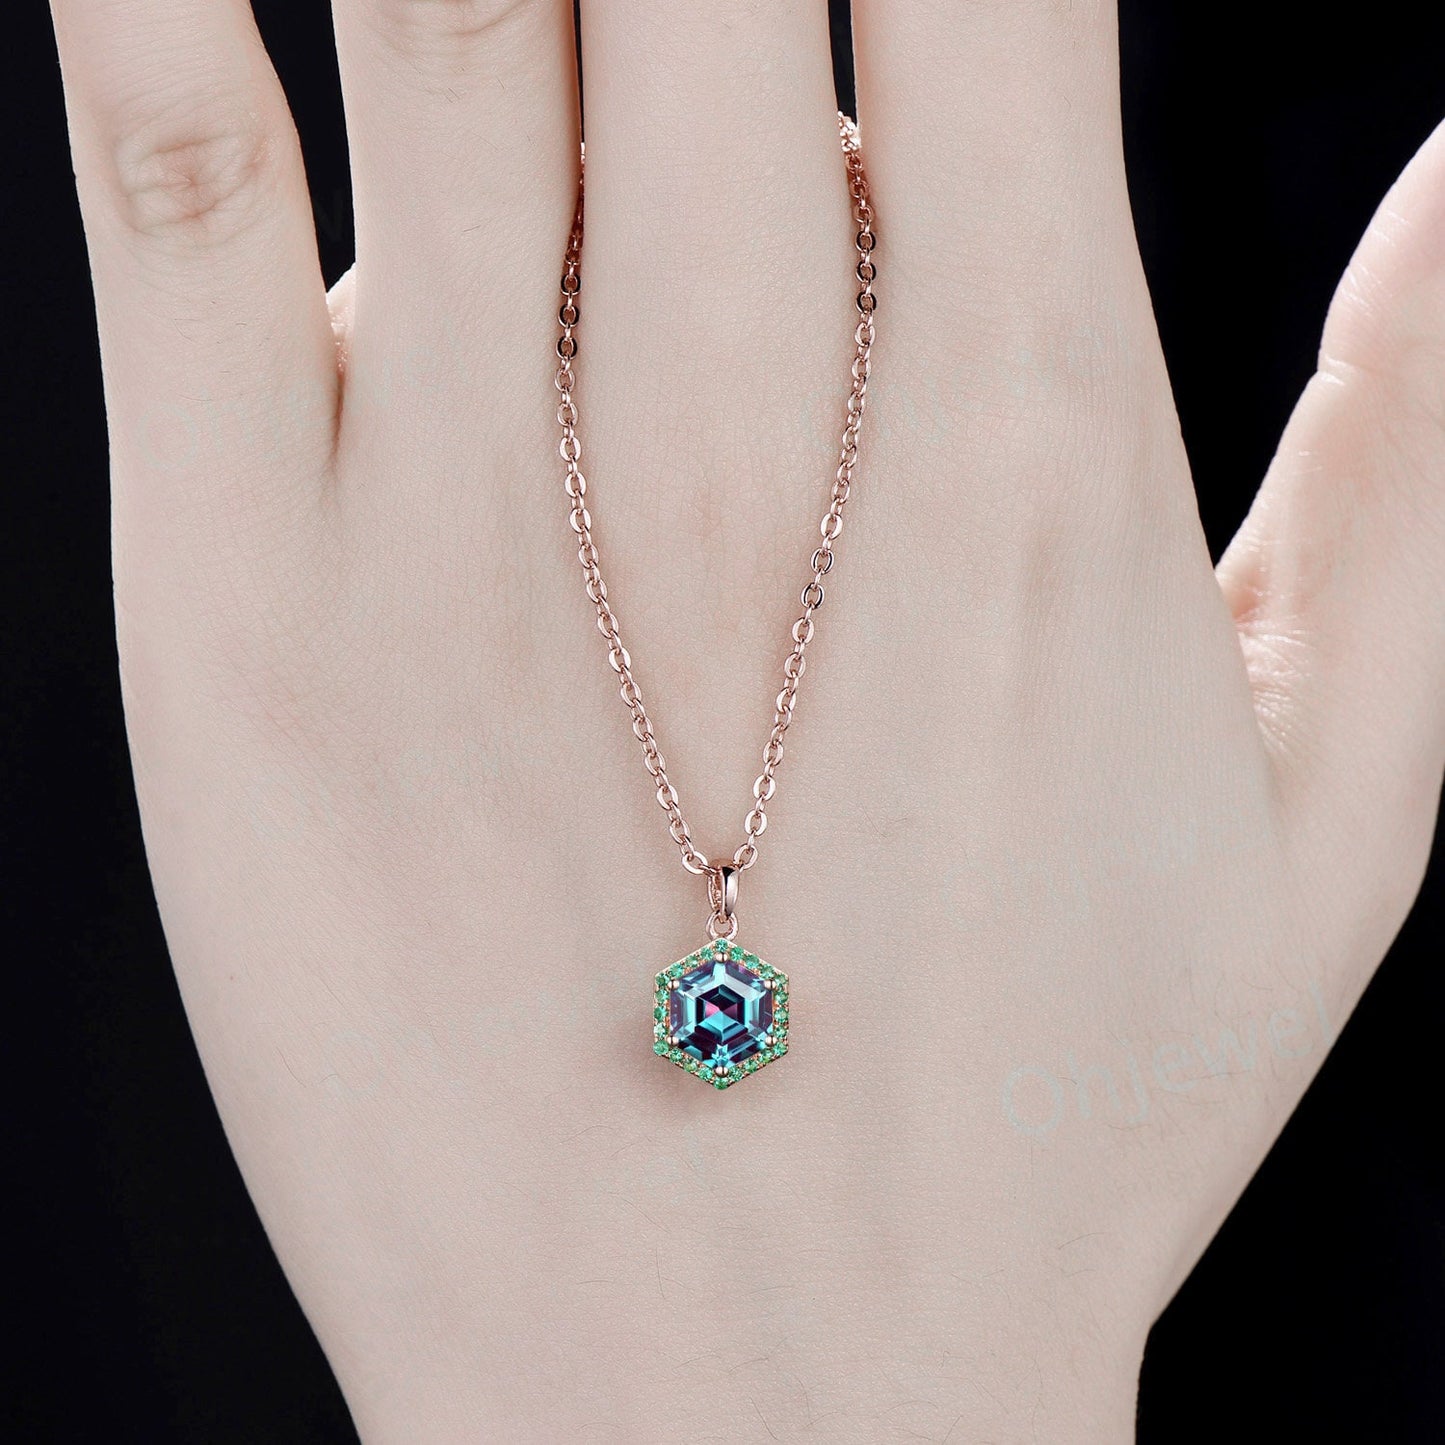 Hexagon cut Alexandrite necklace dainty halo emerald unique necklace Pendant for women June birthstone 14k rose gold jewelry gift